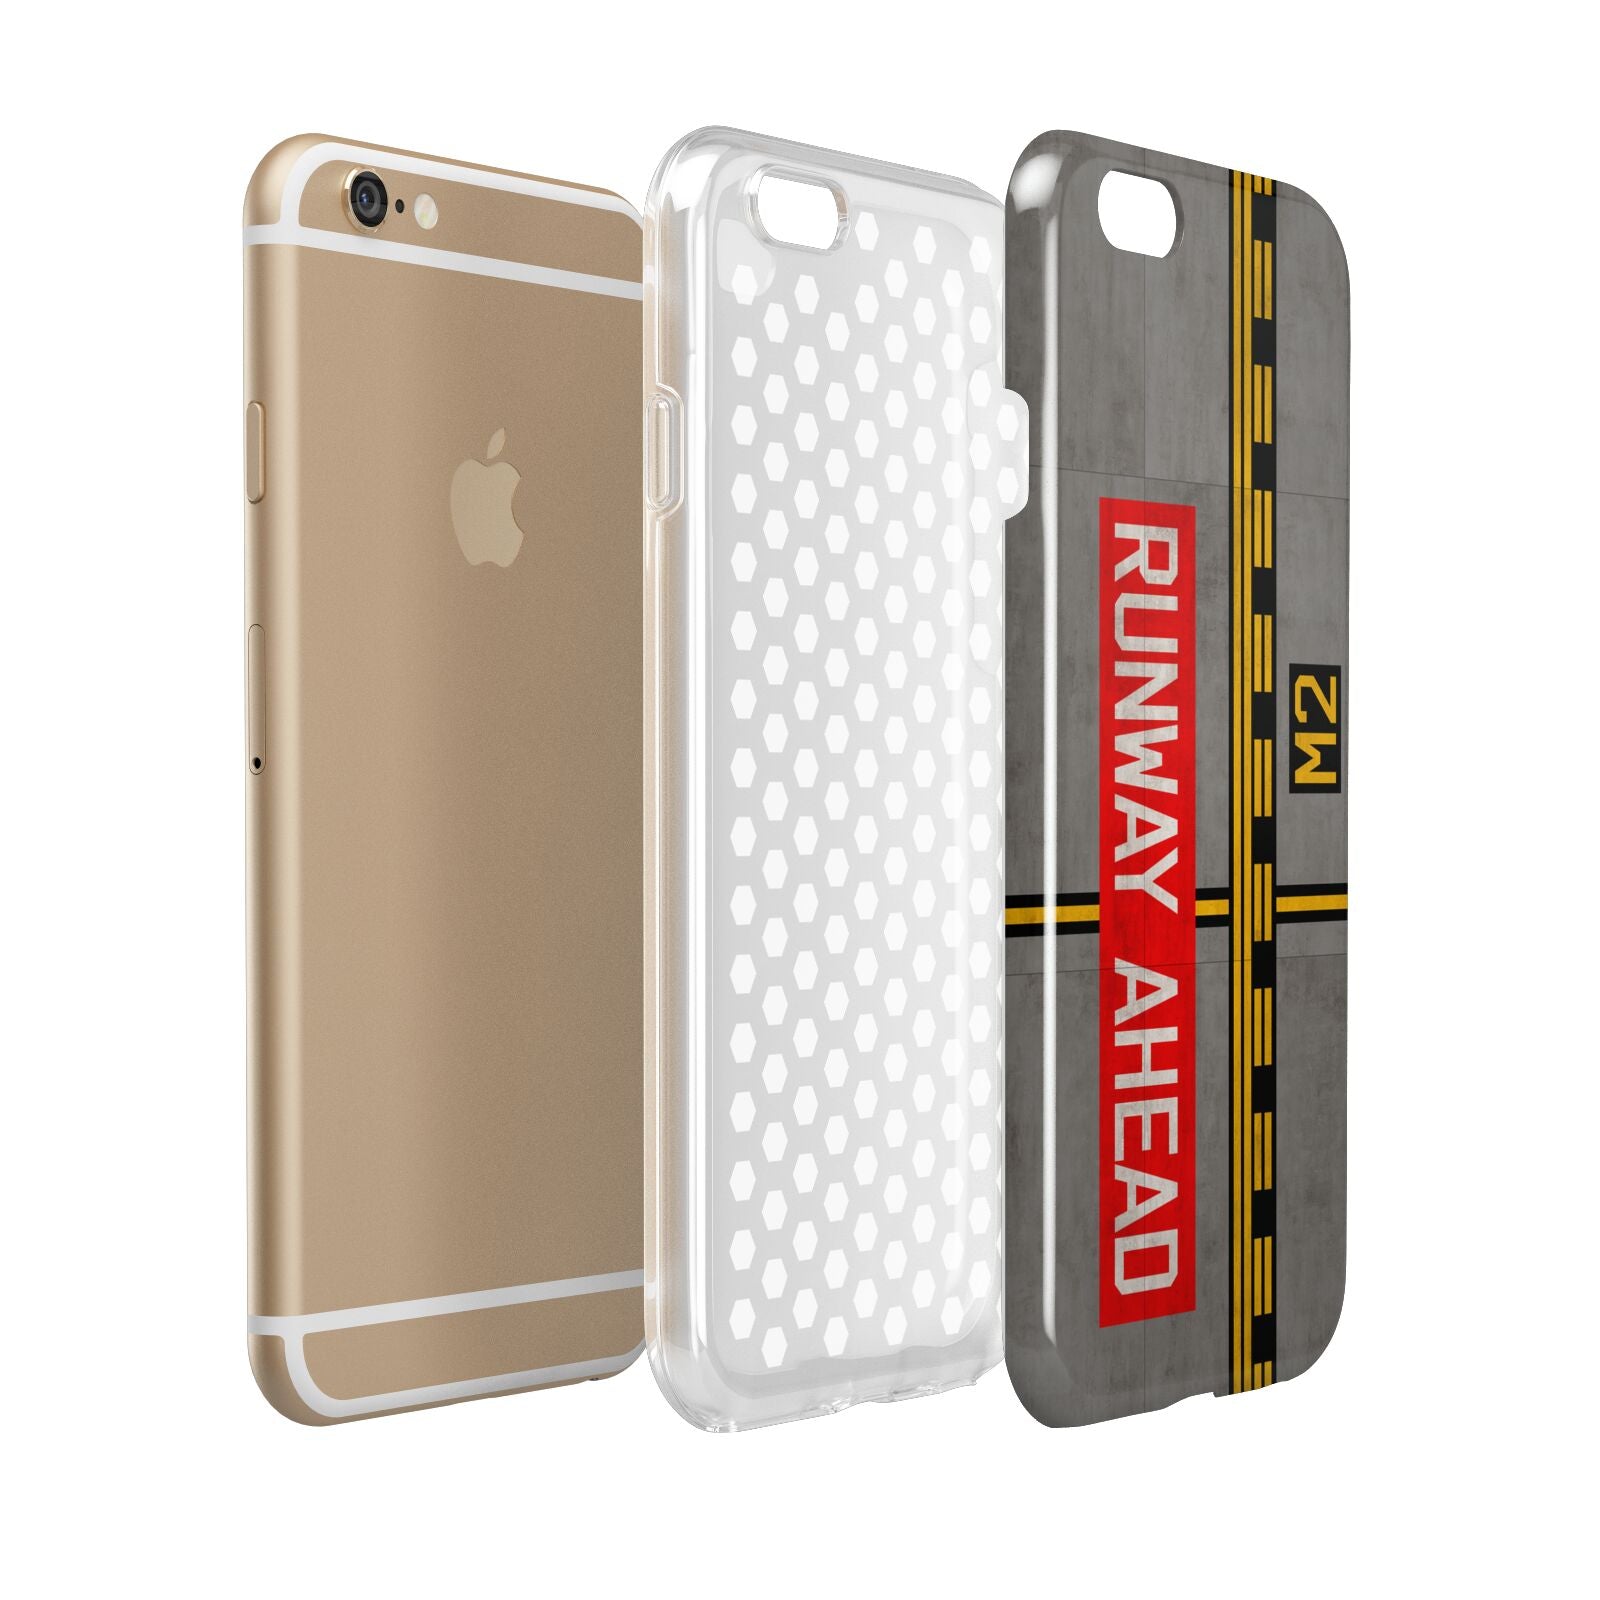 Runway Ahead Apple iPhone 6 3D Tough Case Expanded view